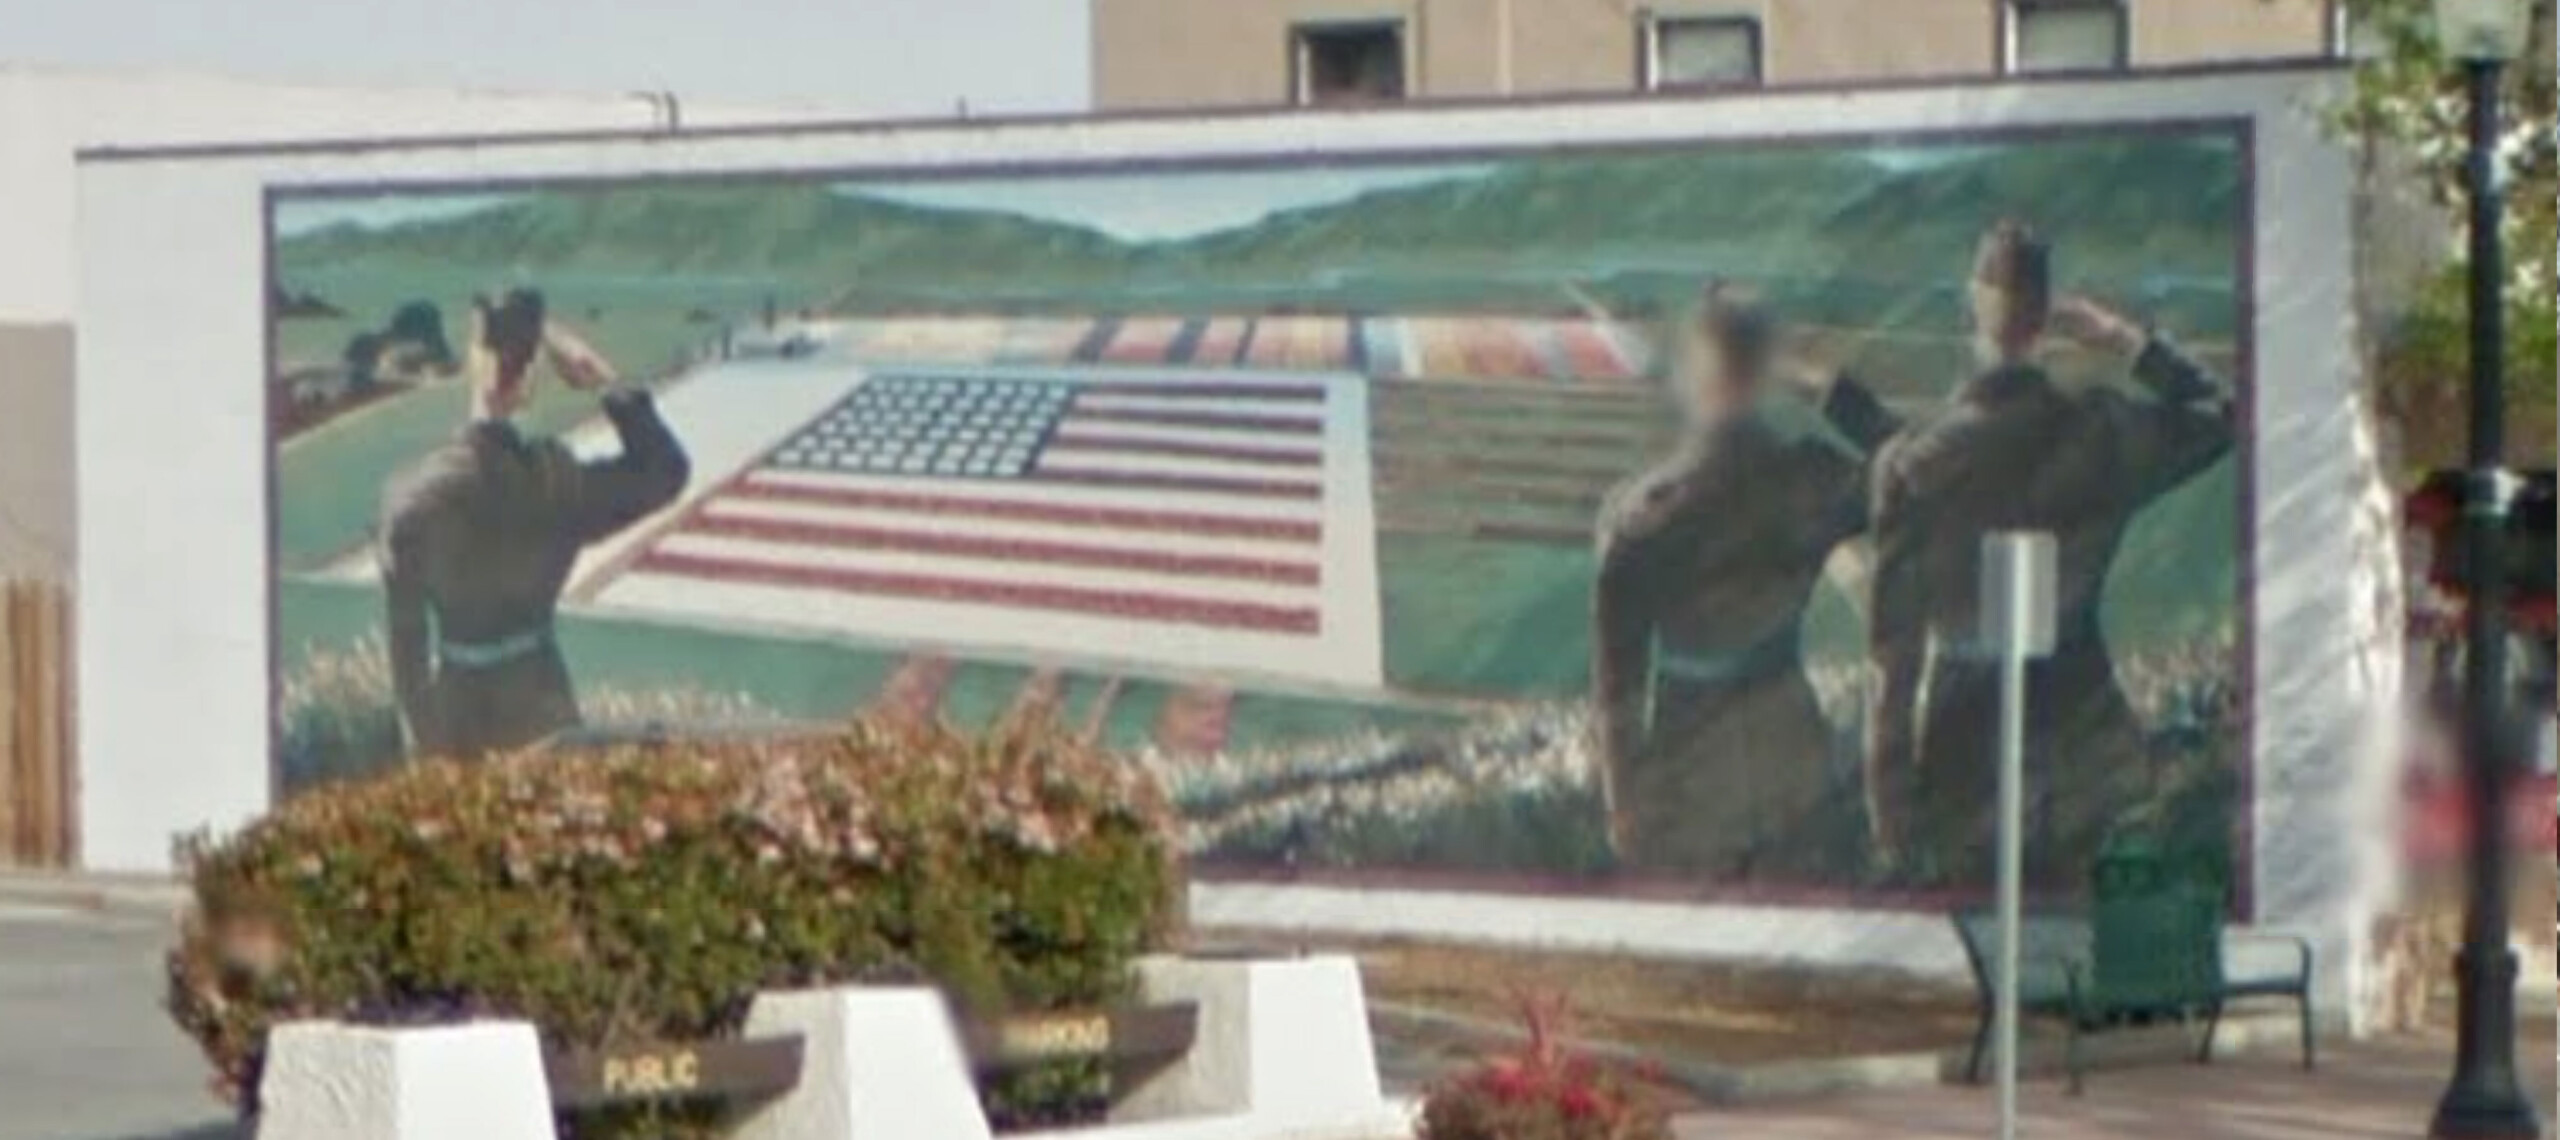 Lompoc Mural - Great Floral Flag (1999) - Located at 131 South H Street (South Wall)